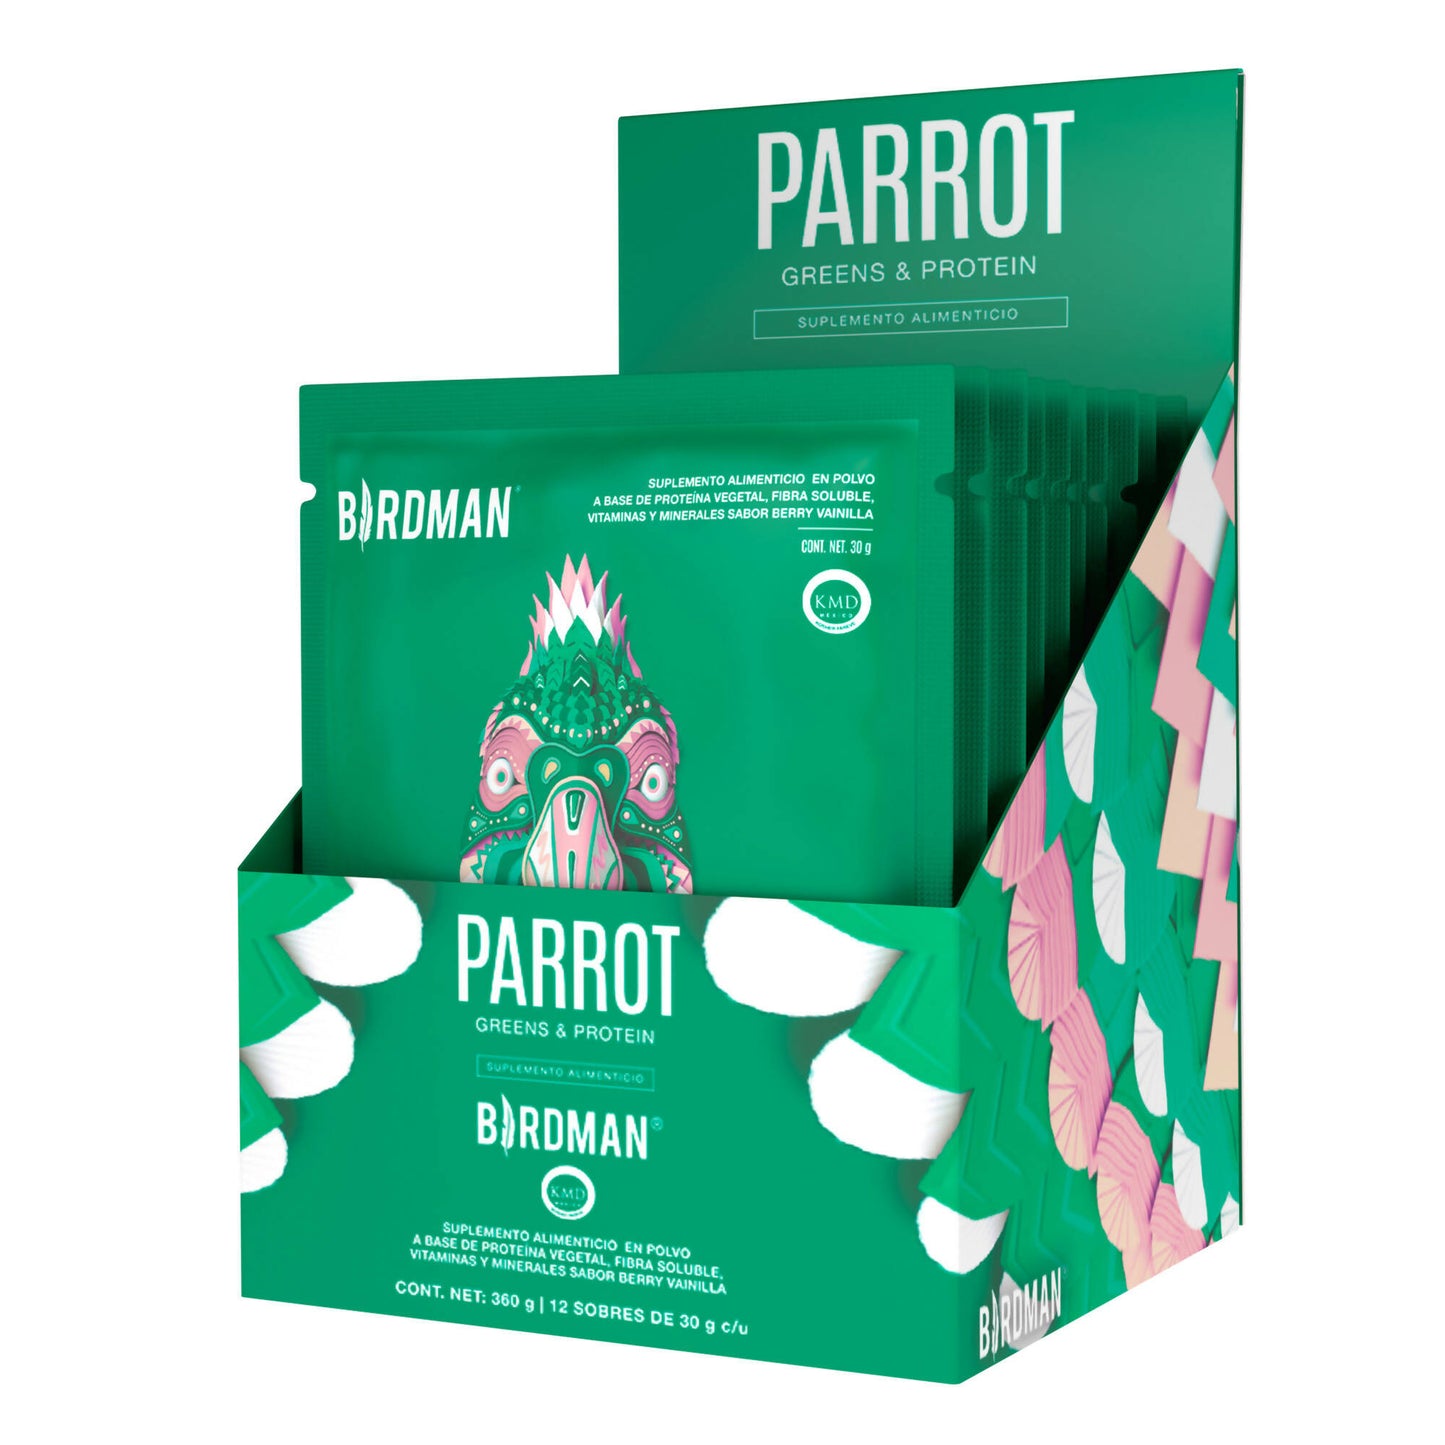 Parrot Greens & Protein Berry Vainilla 12 multipack